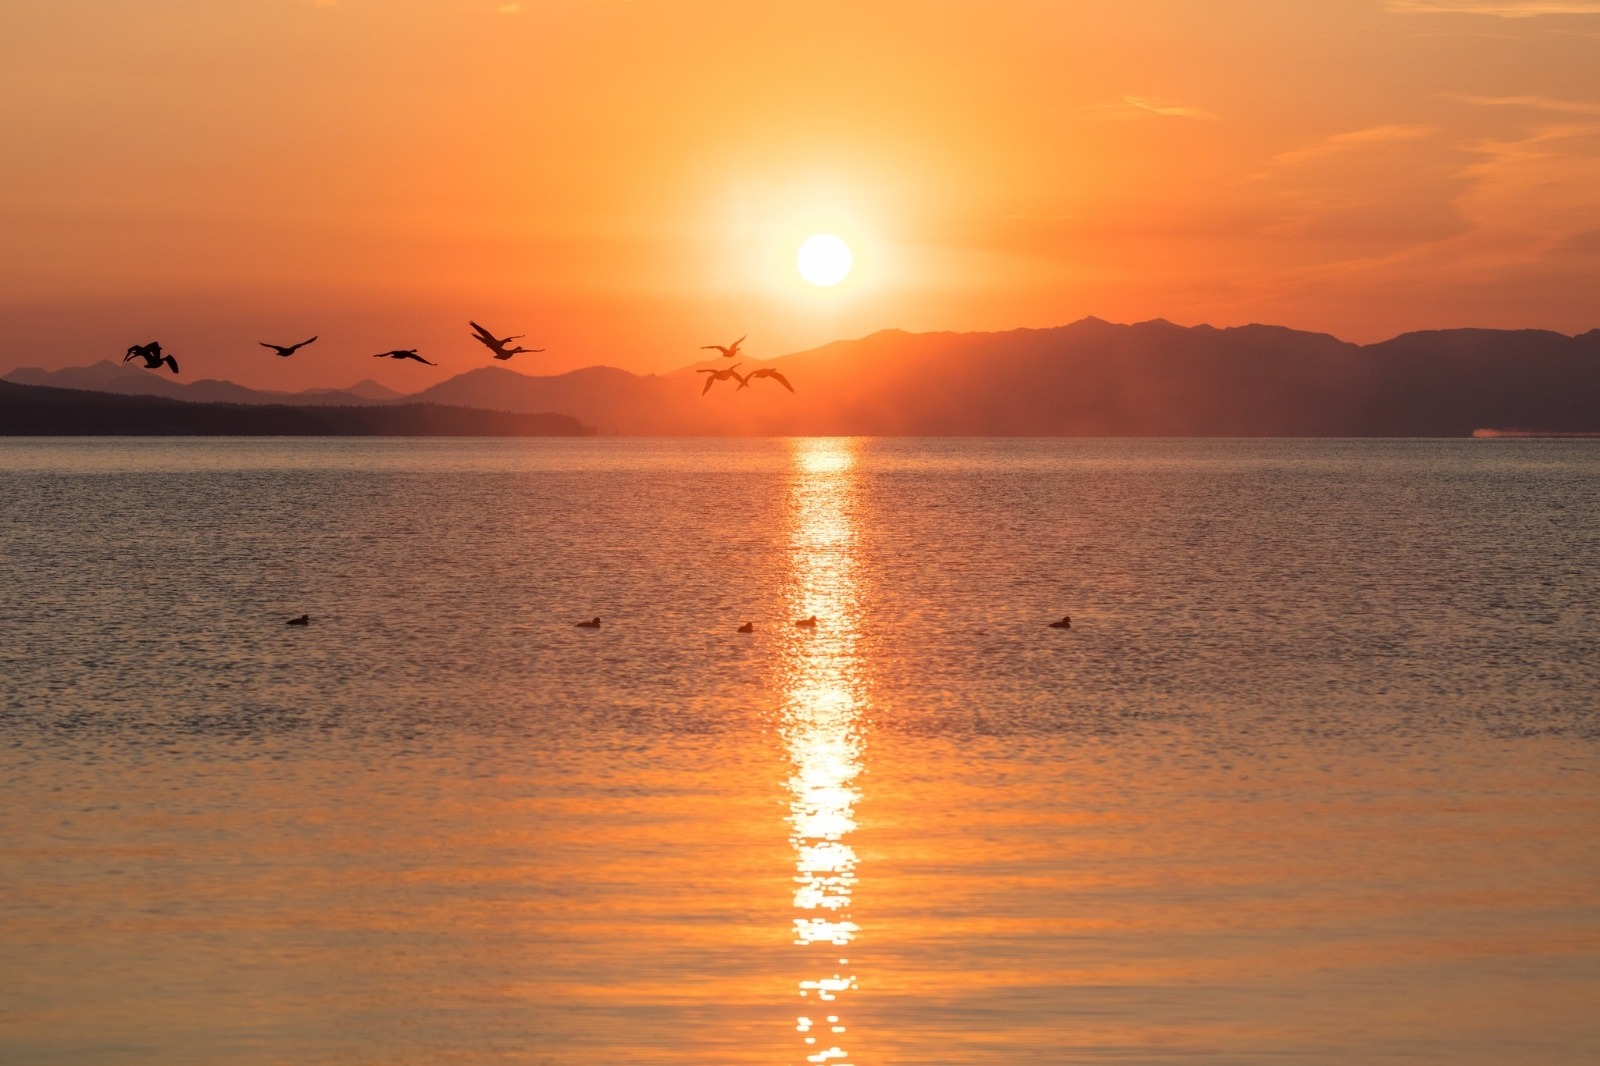 Canada geese flying serenely through sunrise on Yellowstone Lake.  How many citizens would be able to describe some of the natural history phenomena occurring in this scene?  Photo courtesy NPS / Jacob W. Frank